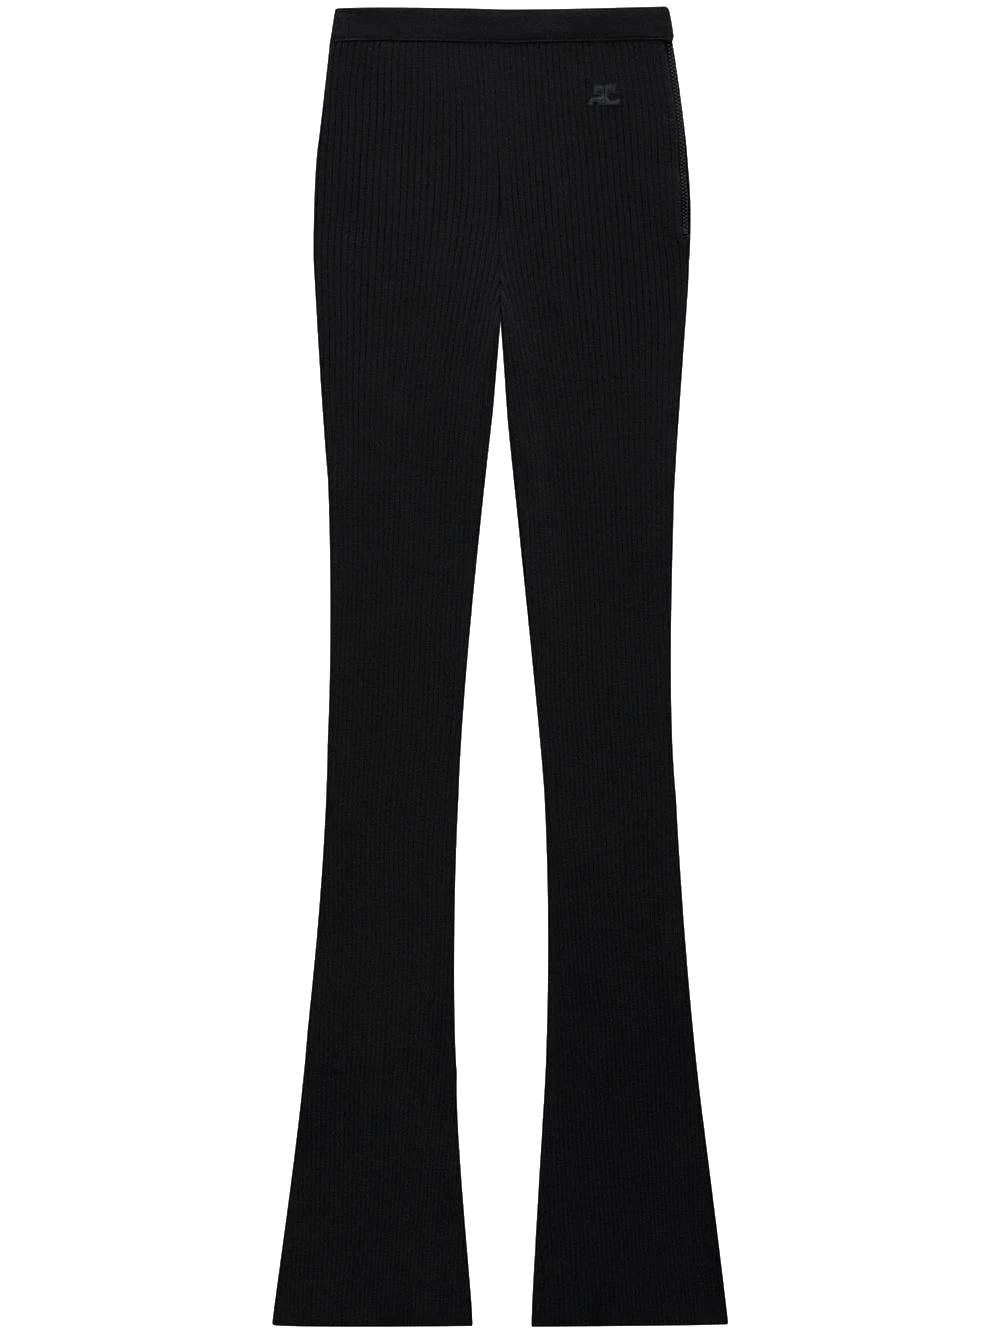 Reediton ribbed flared trousers